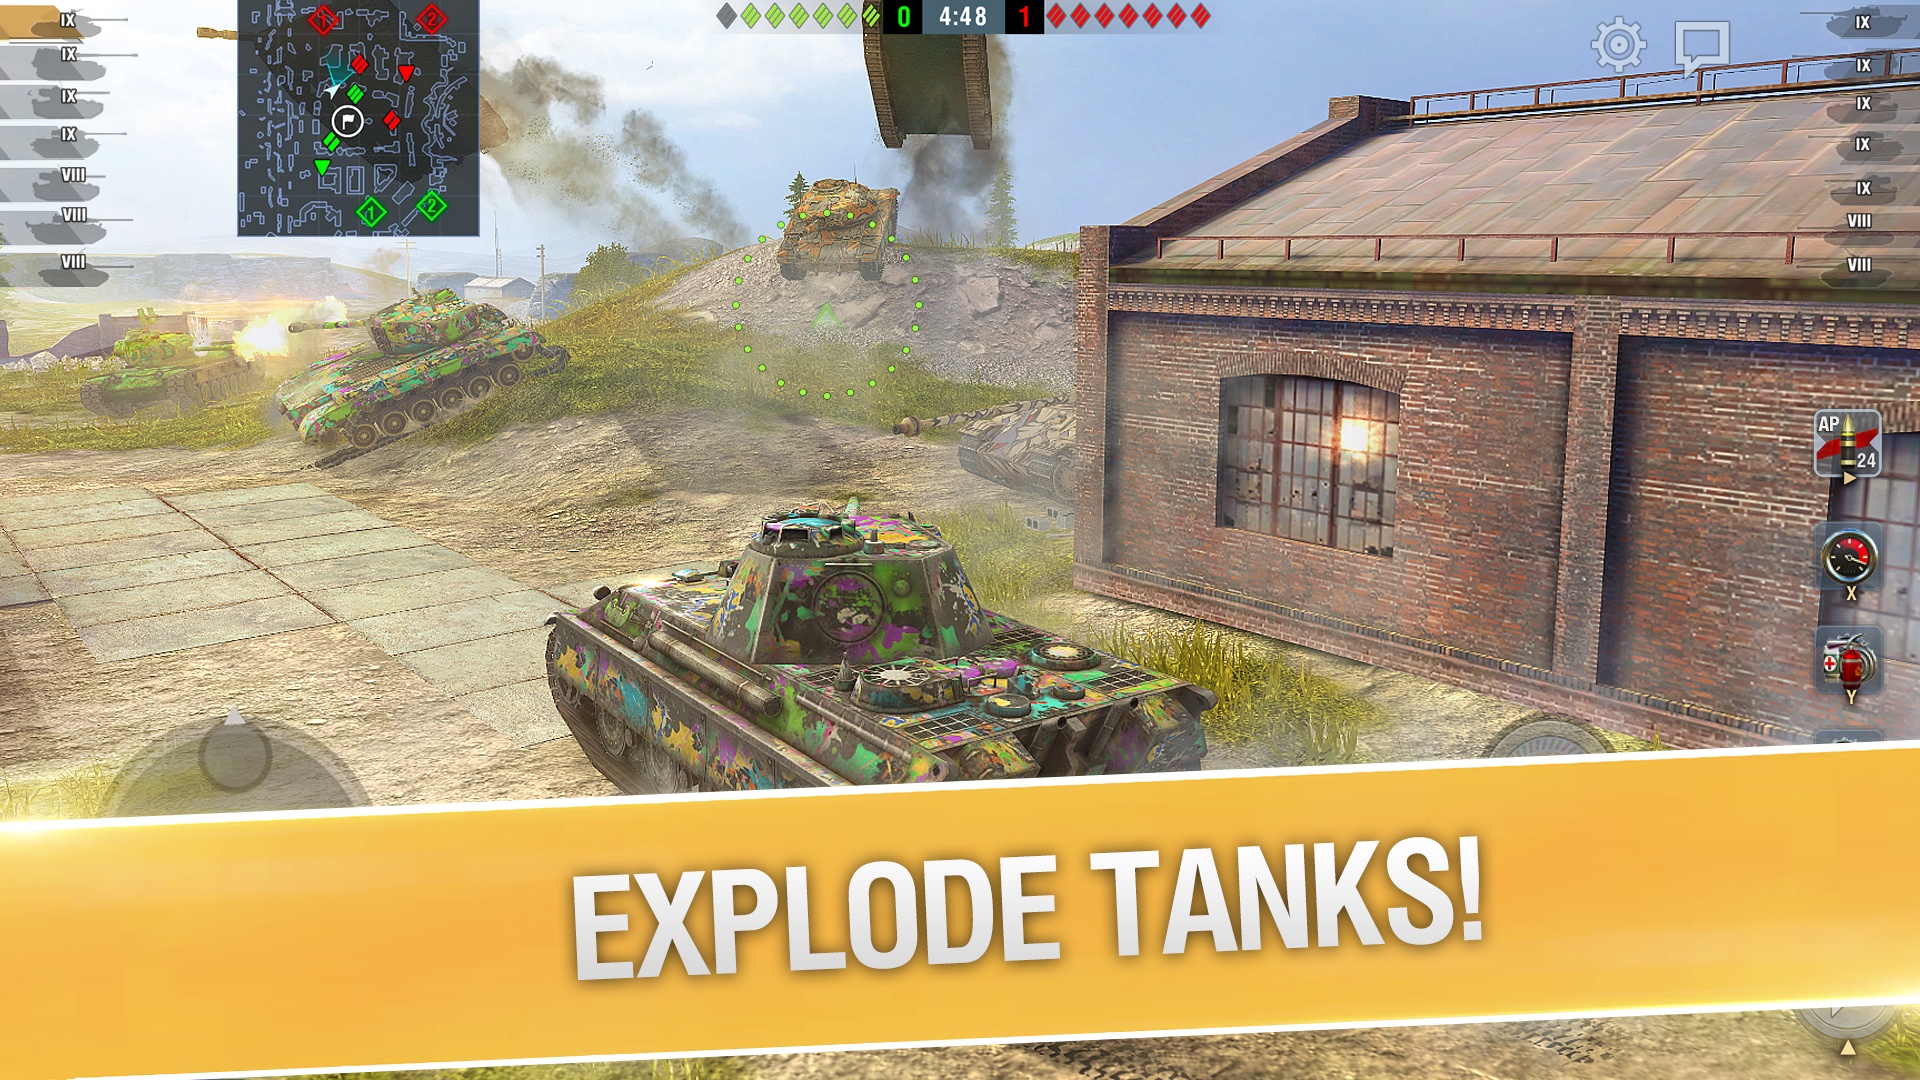 World of Tanks Blitz Celebrates their Birthday with Special Events and a Celebrity Guest